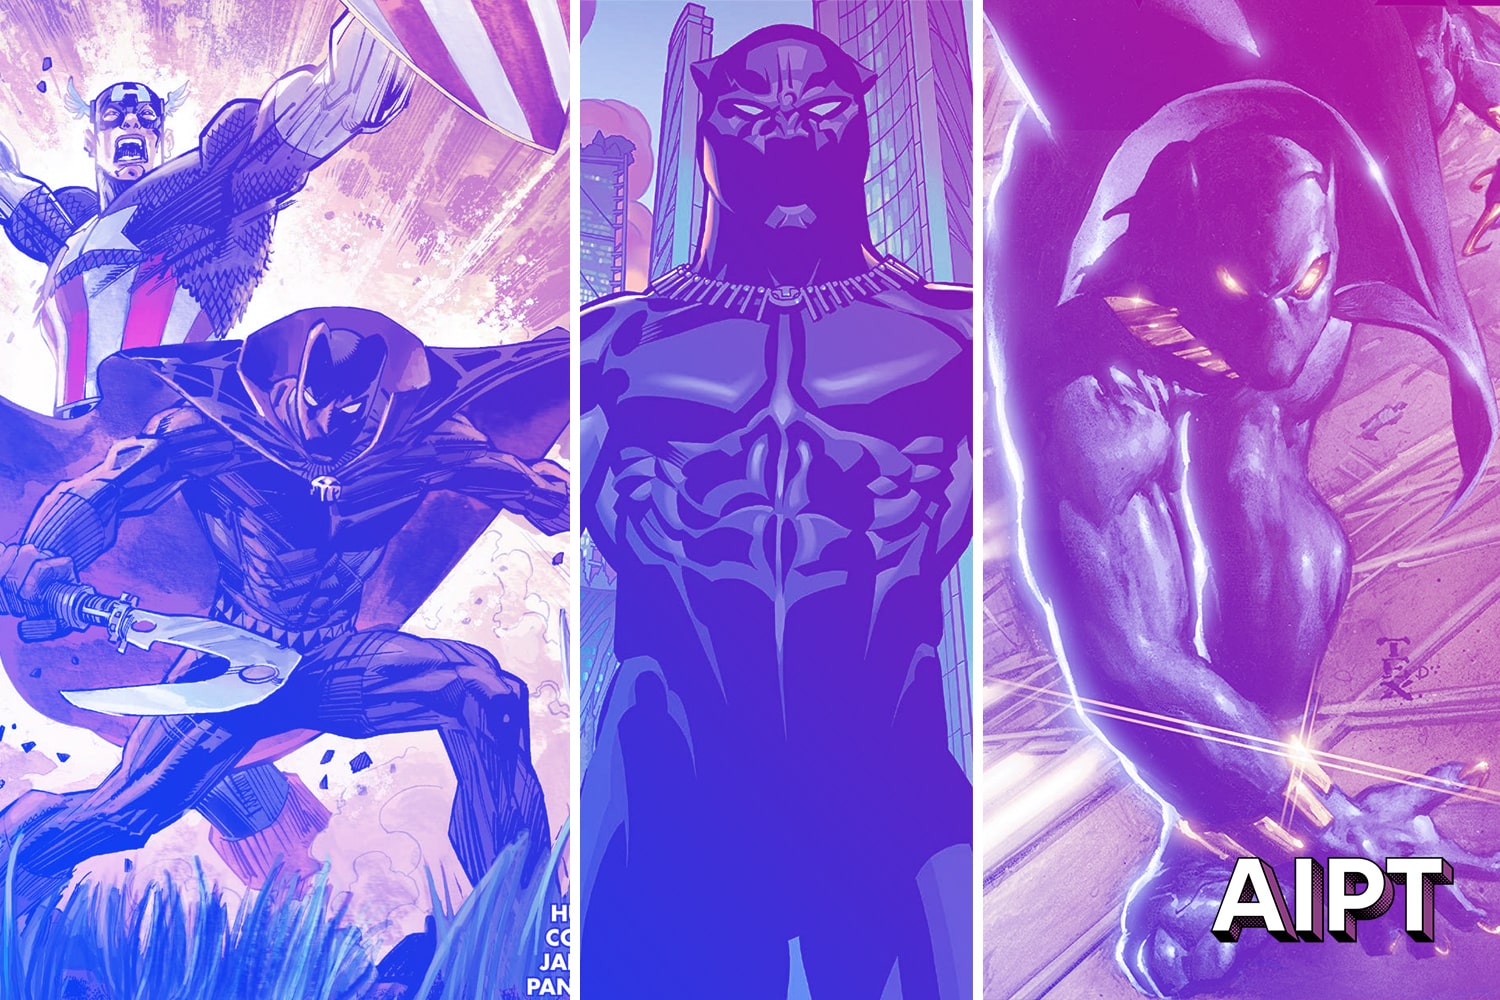 Comixology has made all 'Black Panther' single issues free